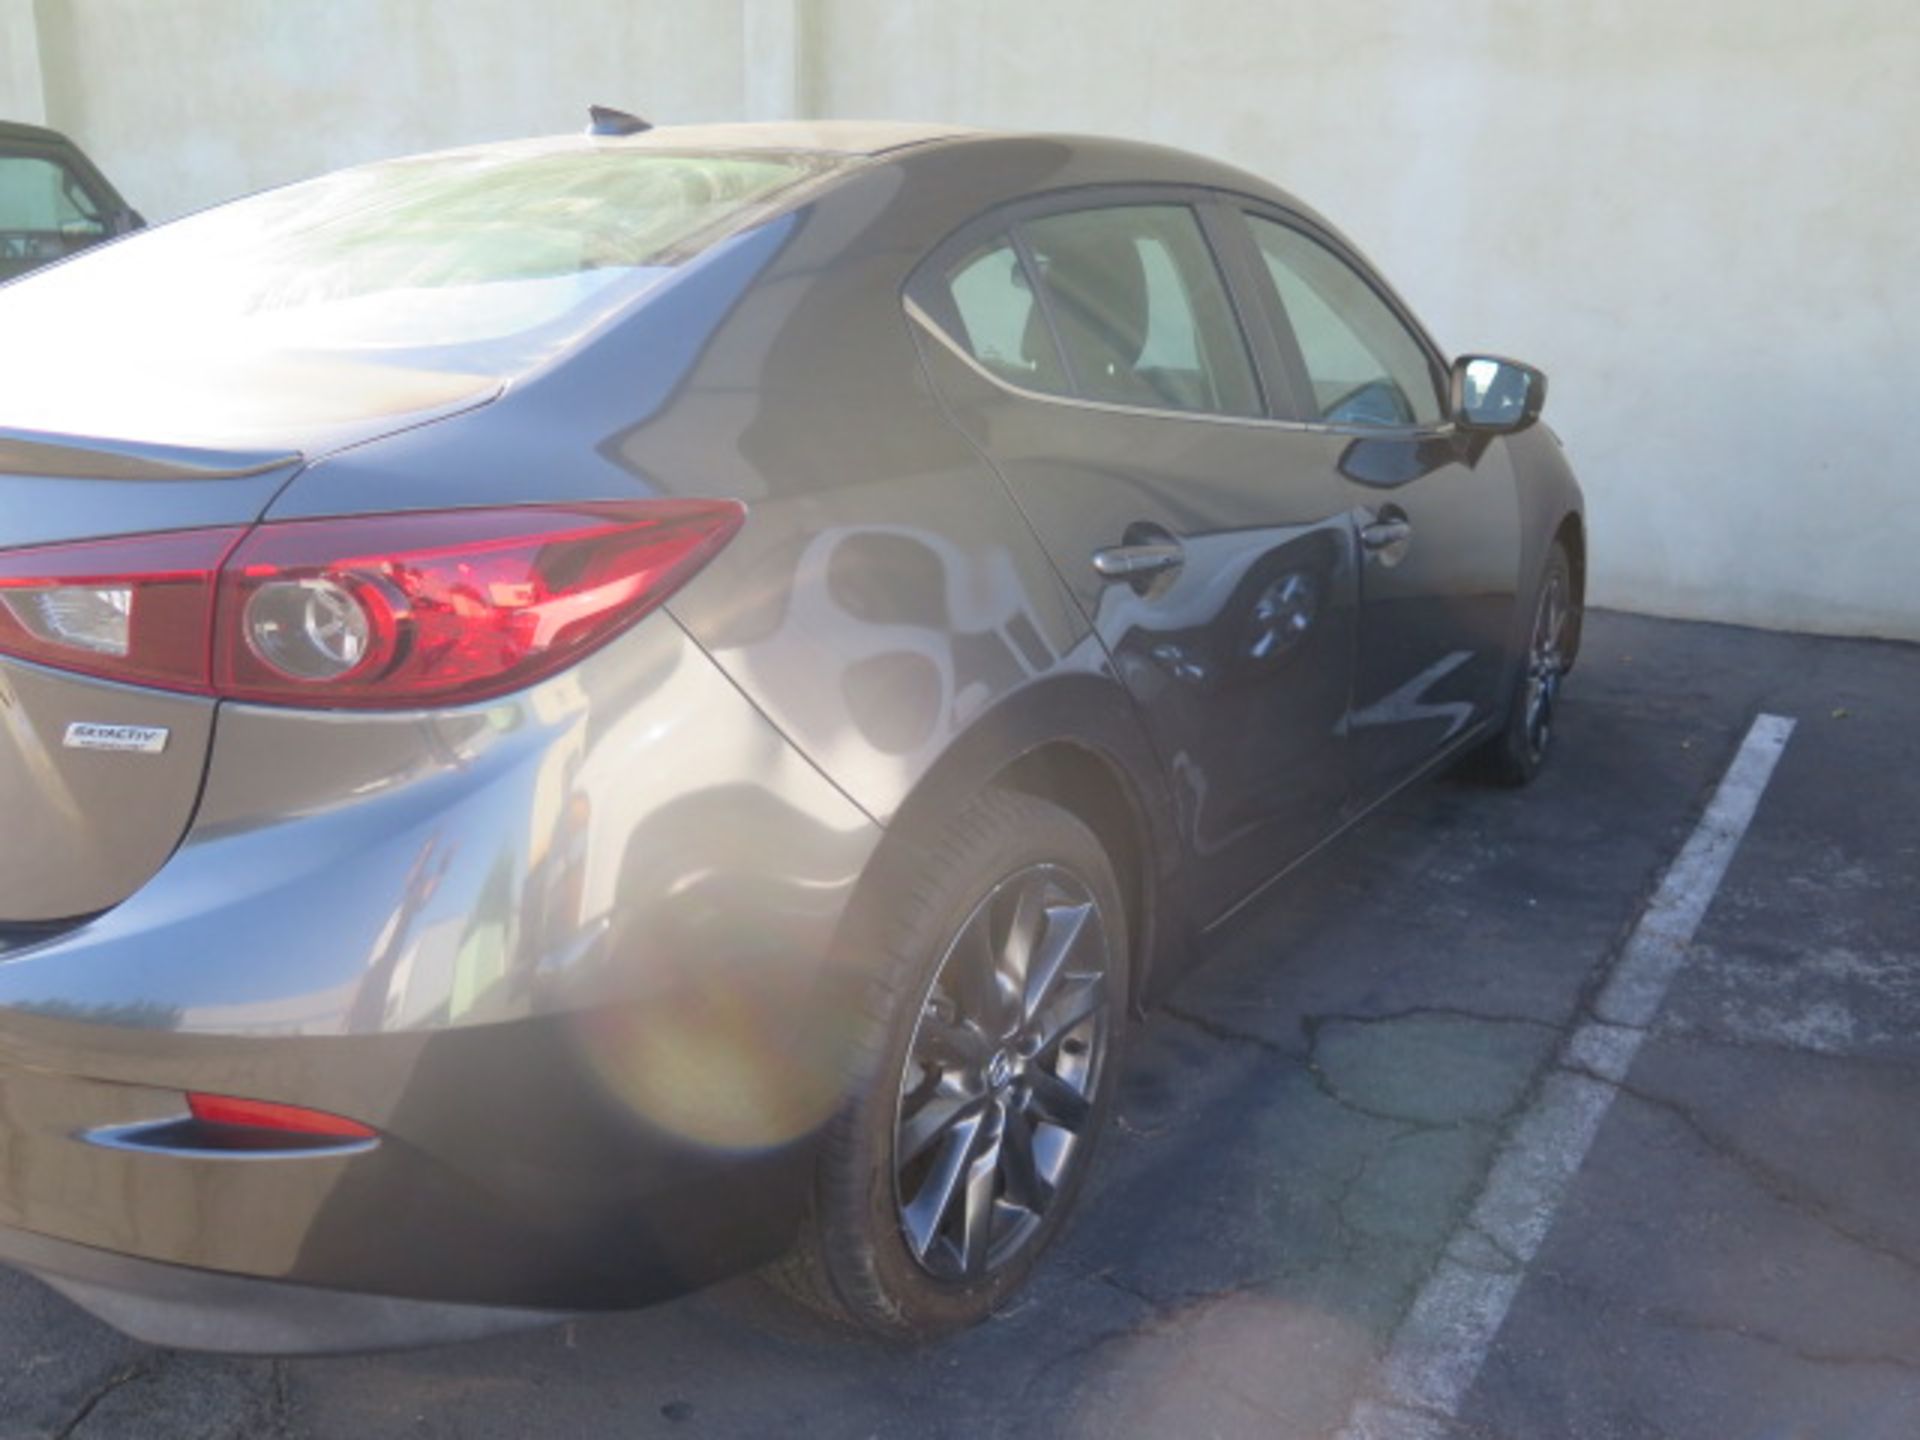 2018 Mazda 3 4-Door Sedan Lisc# 8CNY428 w/Gas Engine, Automatic Trans, Front End Damage, SOLD AS IS - Image 5 of 25